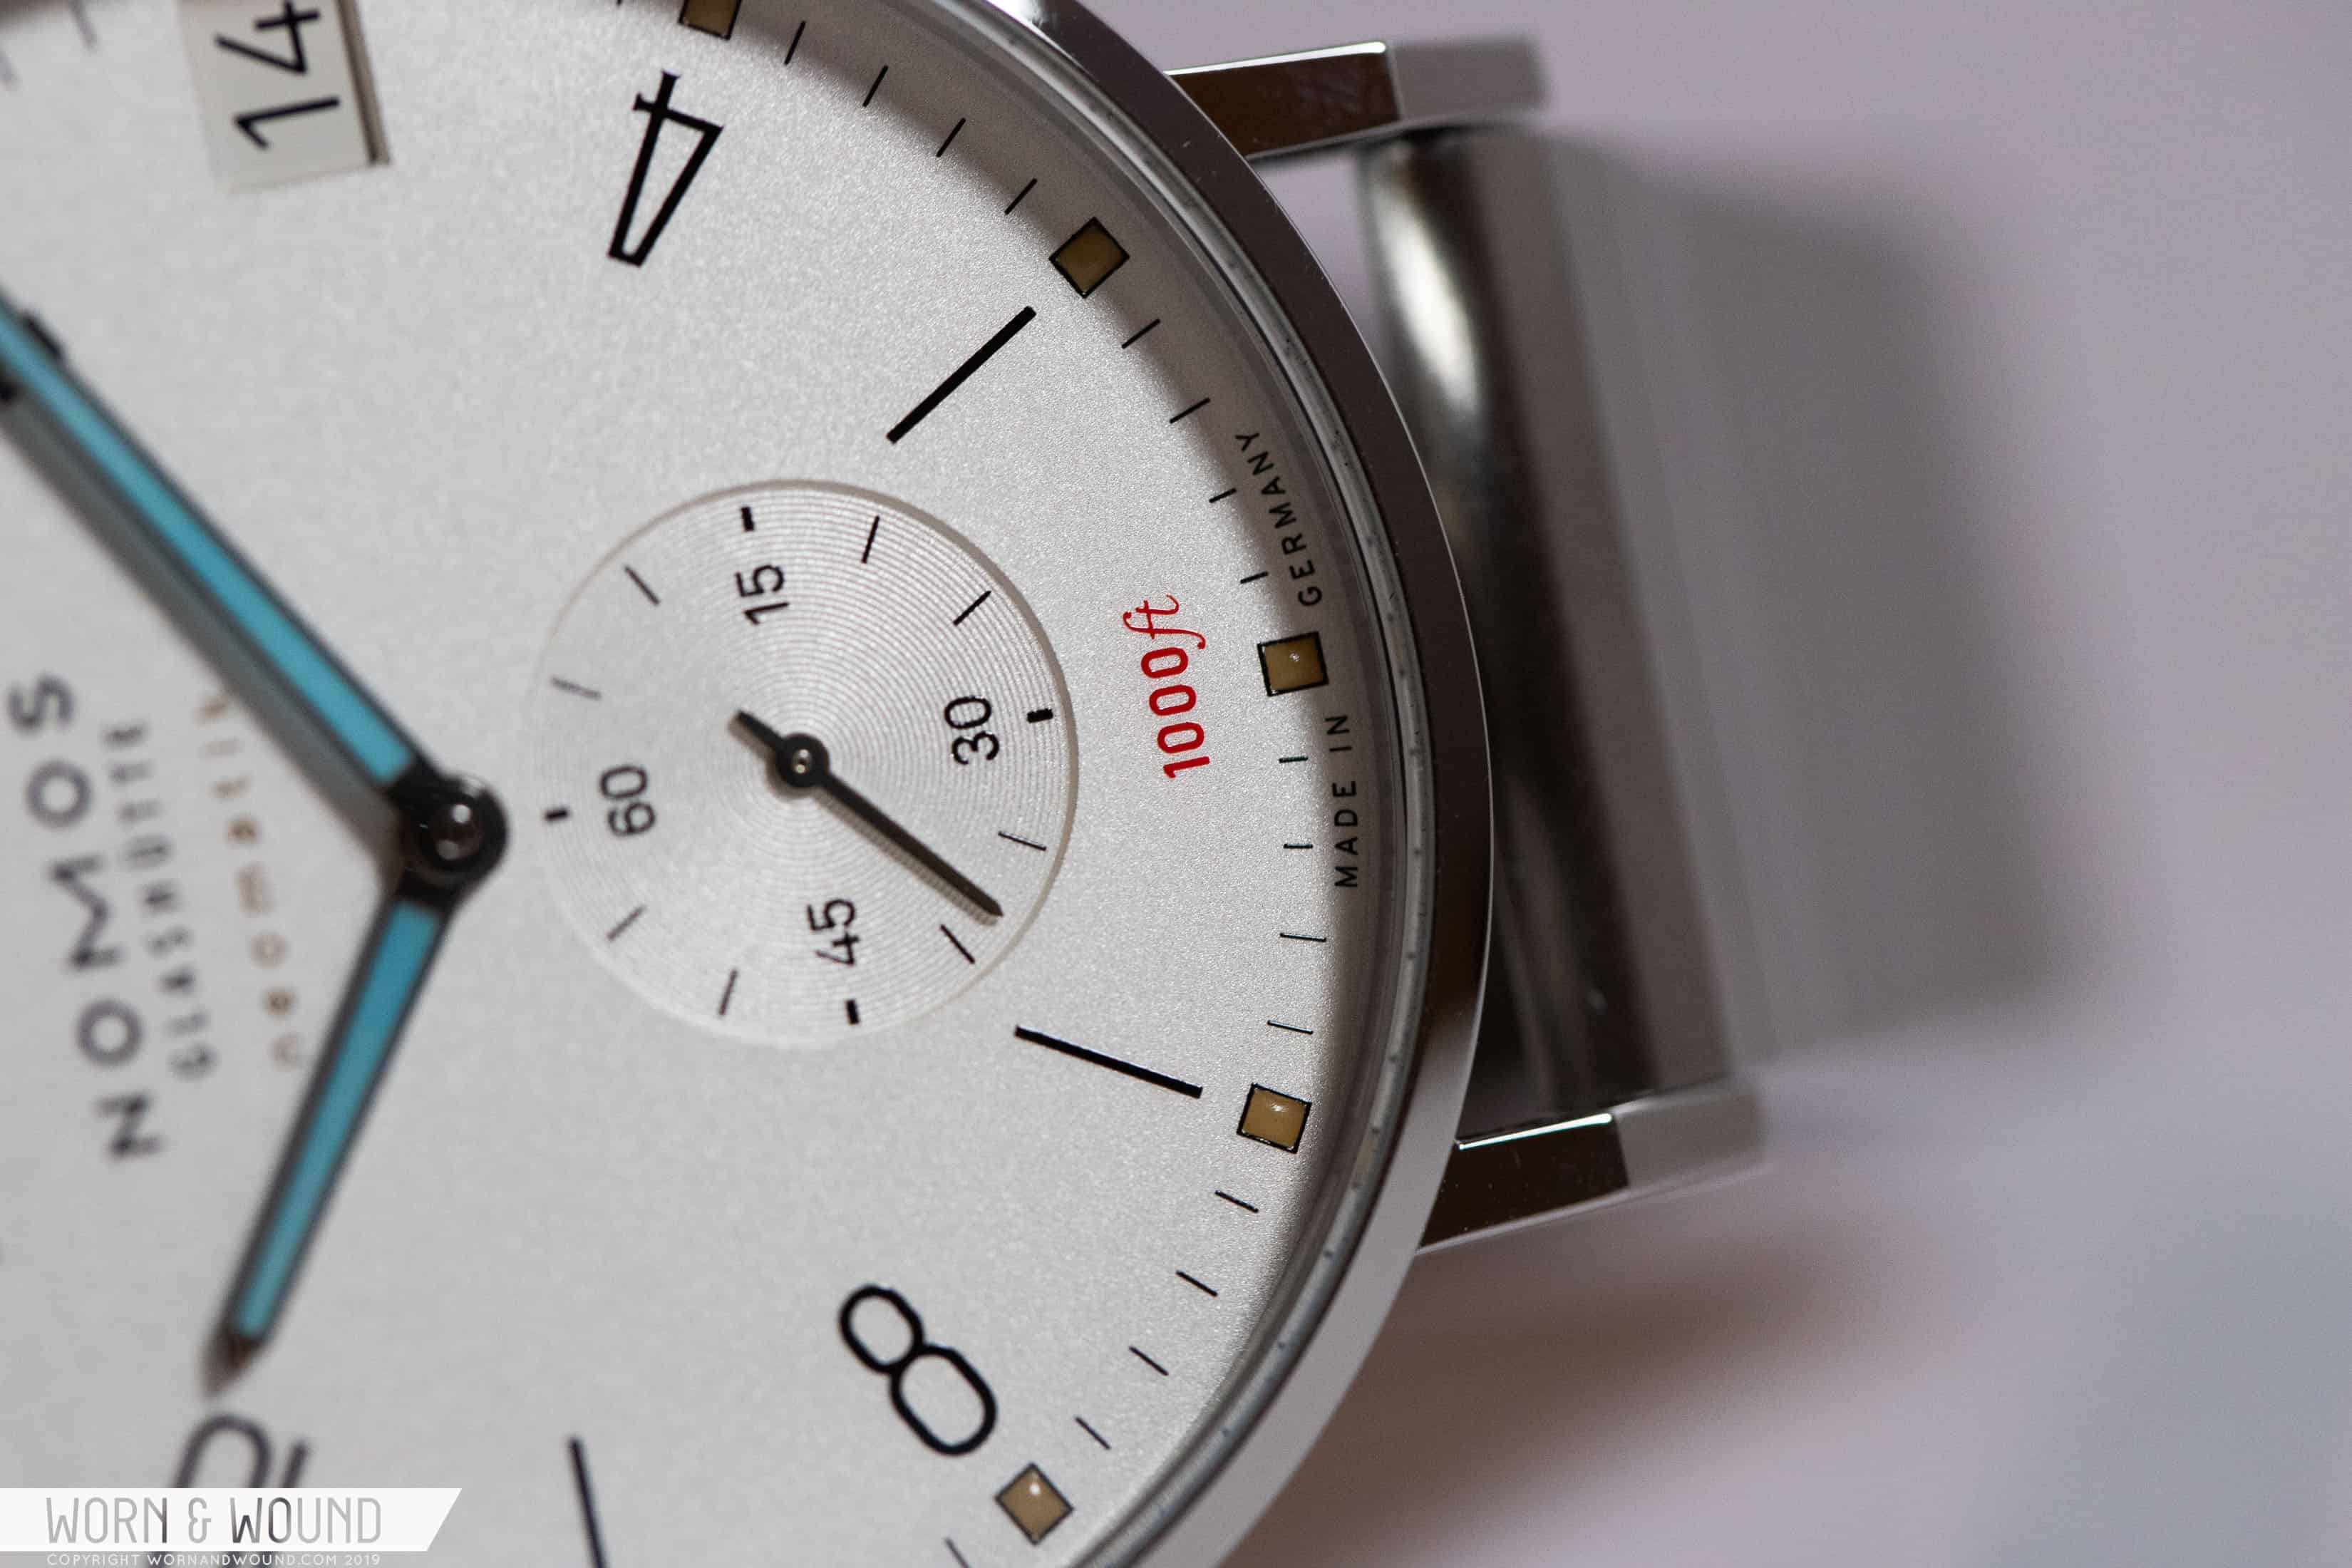 First Look at the Nomos Club and Tangente Sport neomatik 42 Date - Worn ...